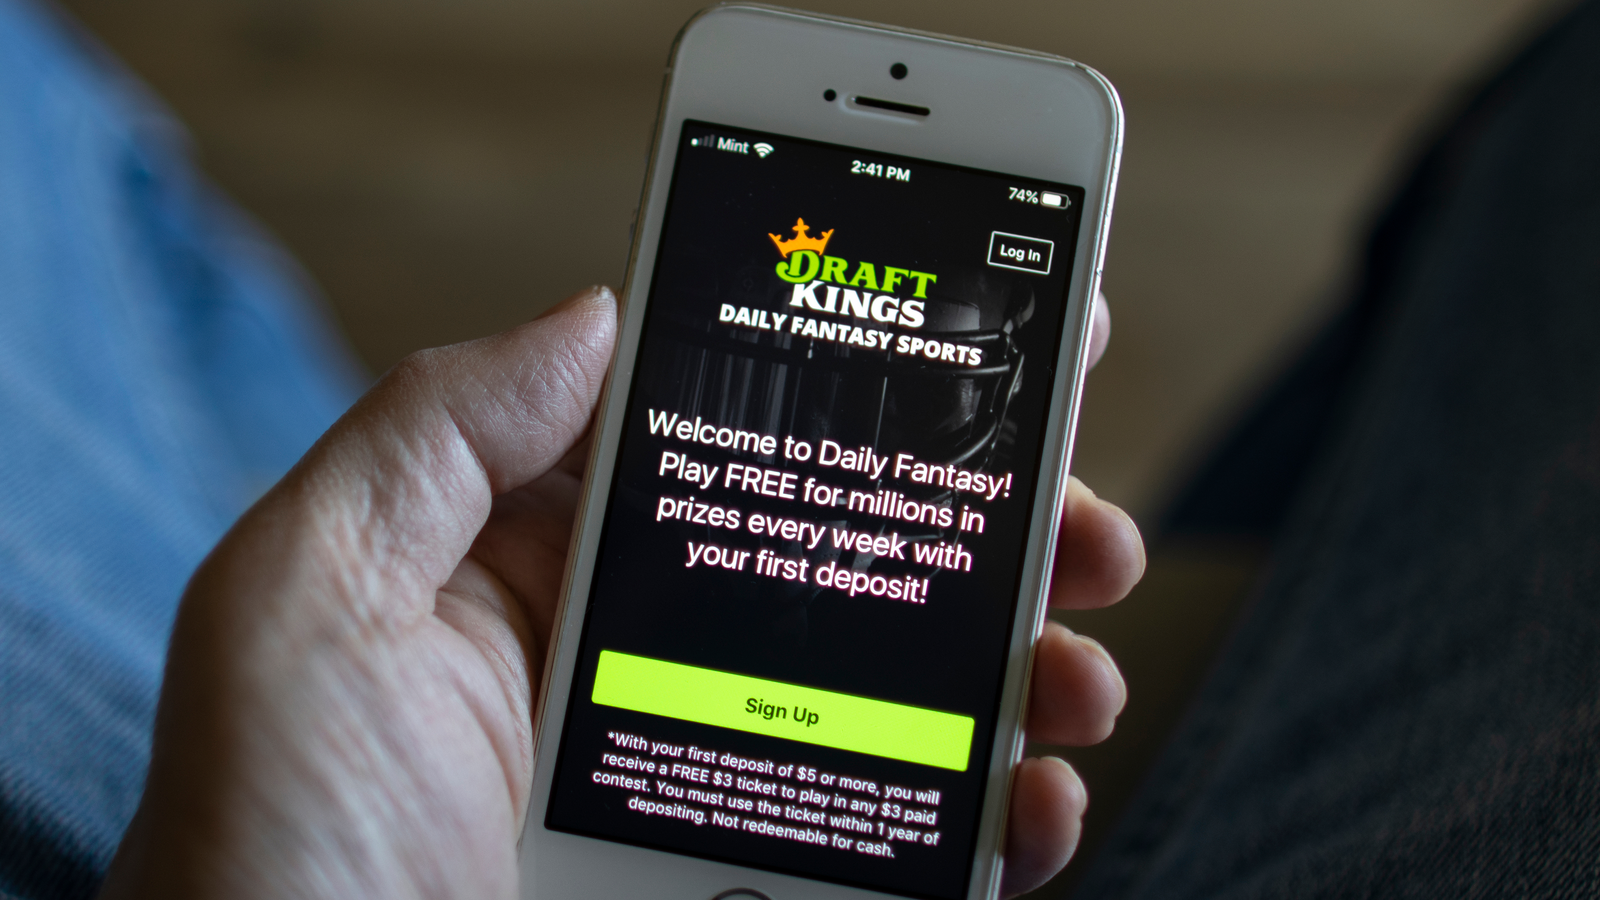 A man opens the DraftKings (DKNG) app from his iPhone. DraftKings is an American daily fantasy sports contest and sports betting operator.